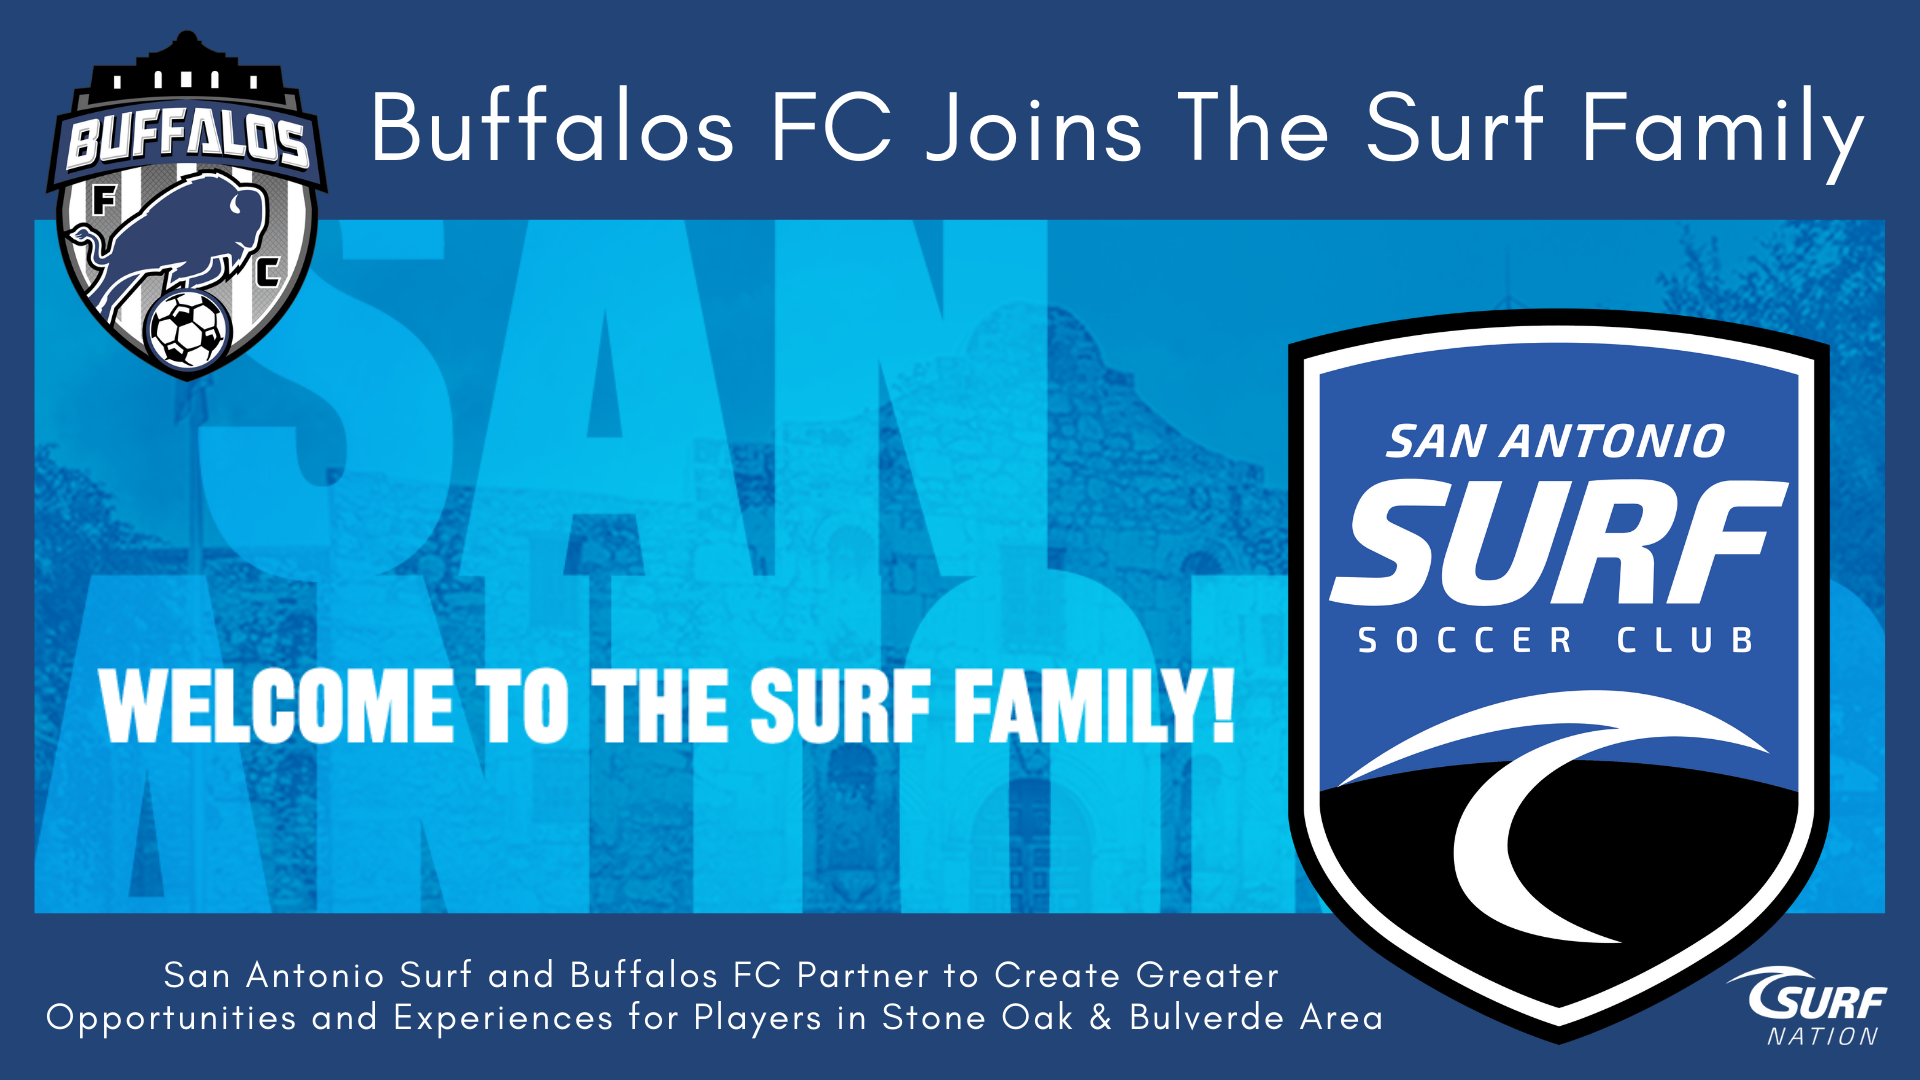 BFC JOINS SURF FAMILY